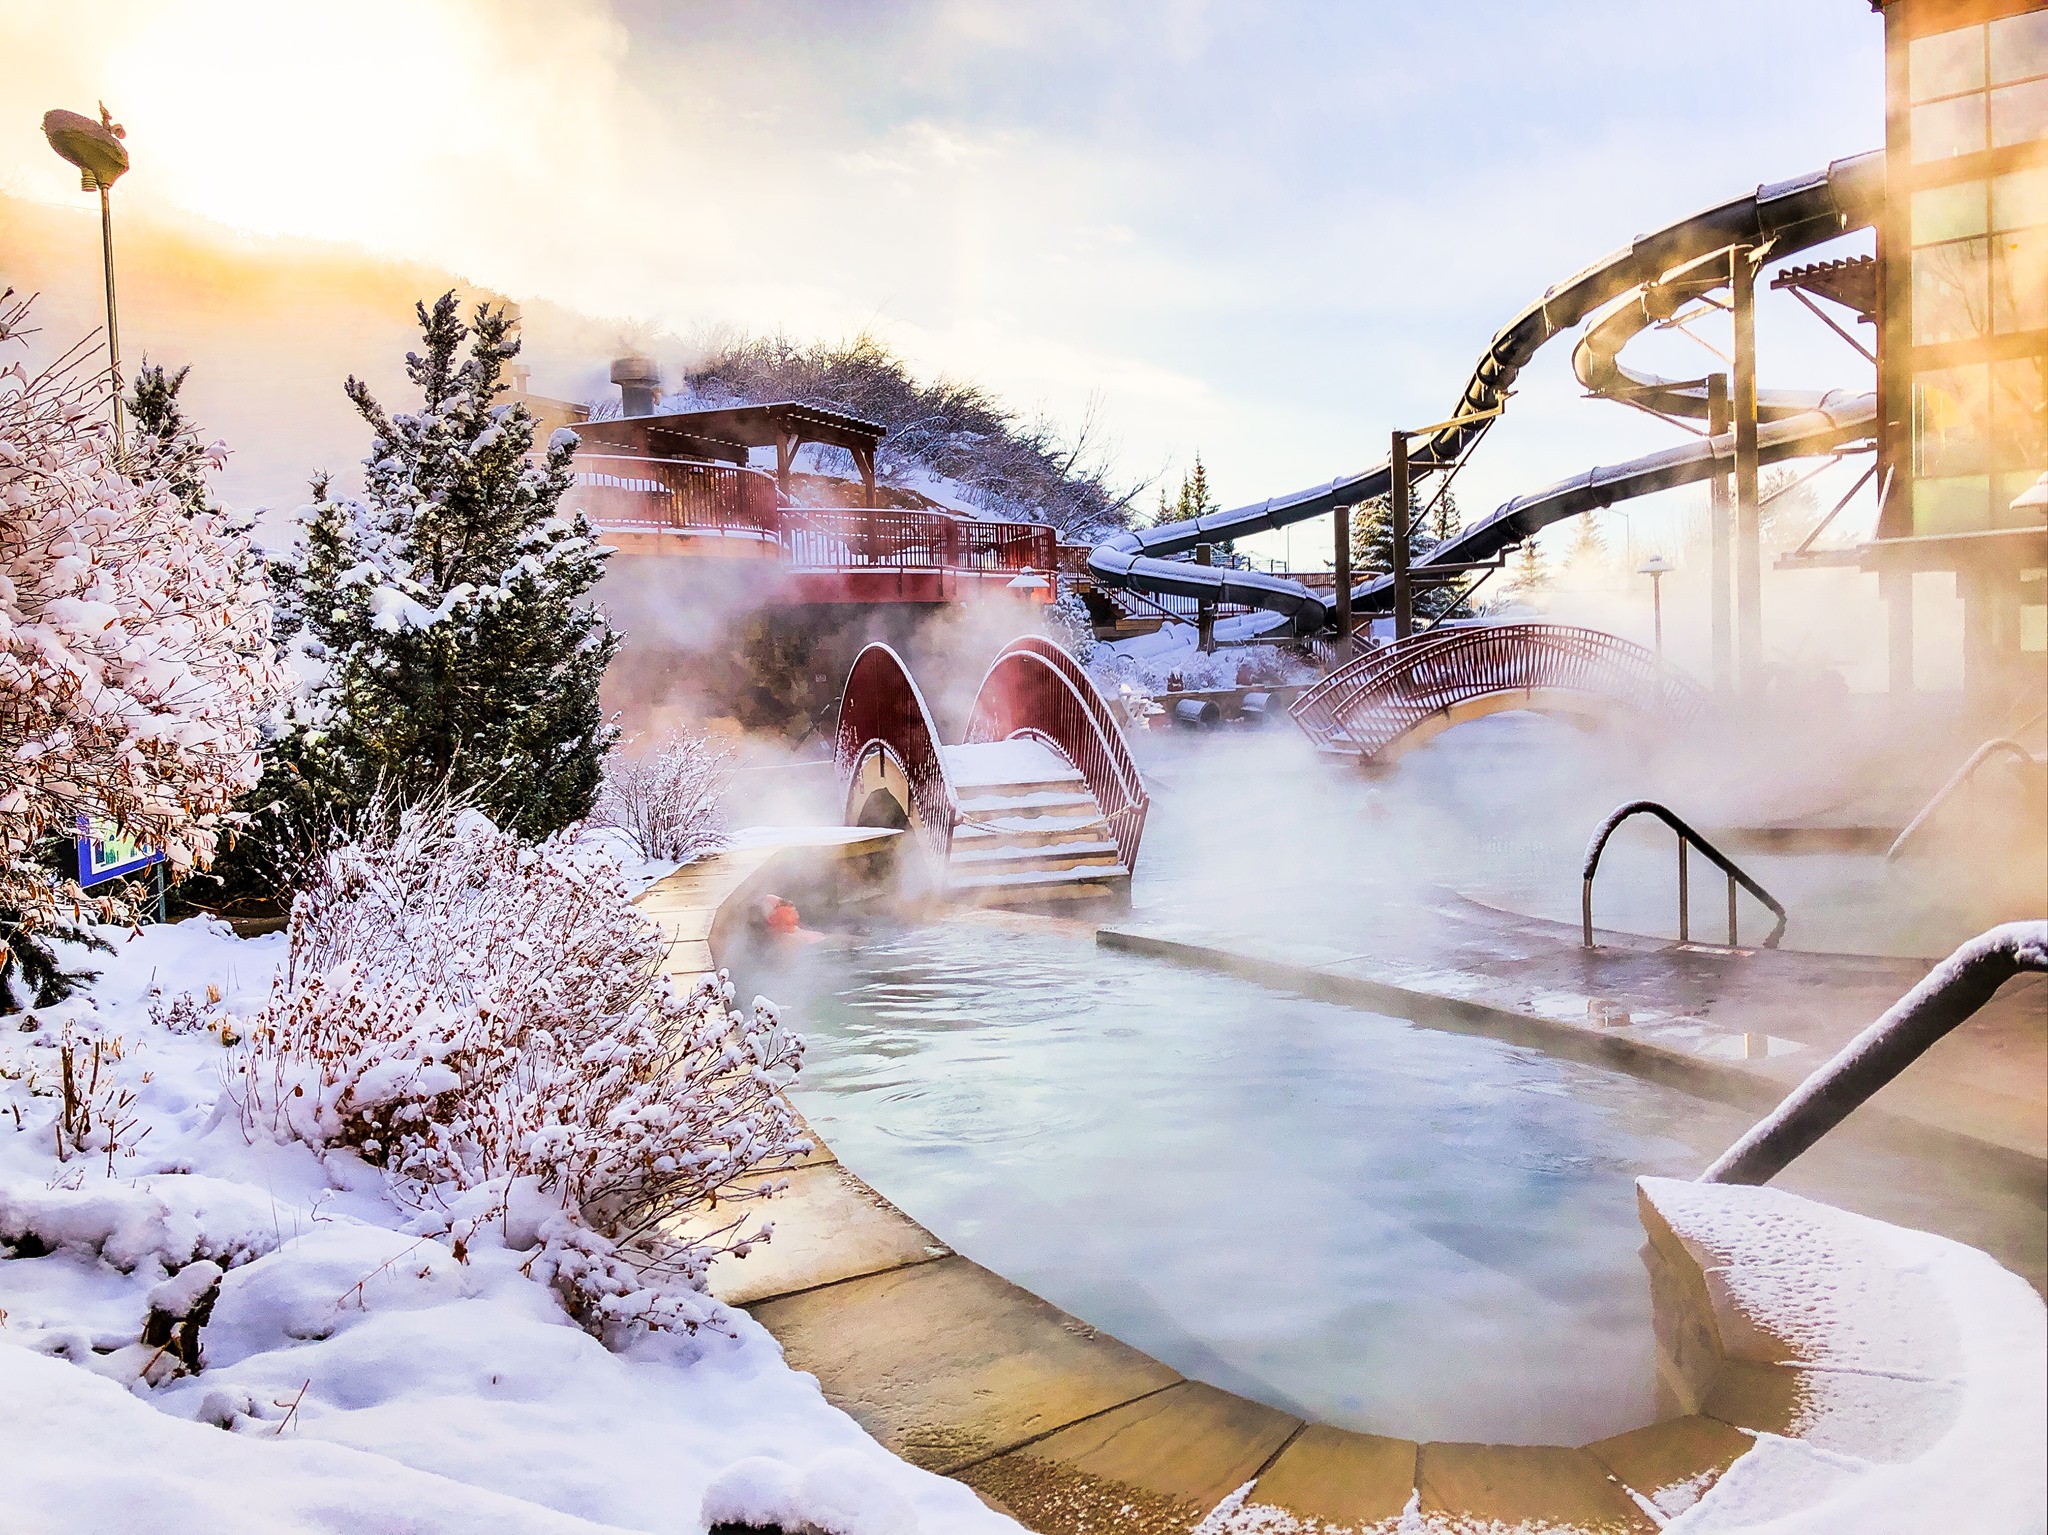 The 6 best Steamboat Springs hot springs to visit